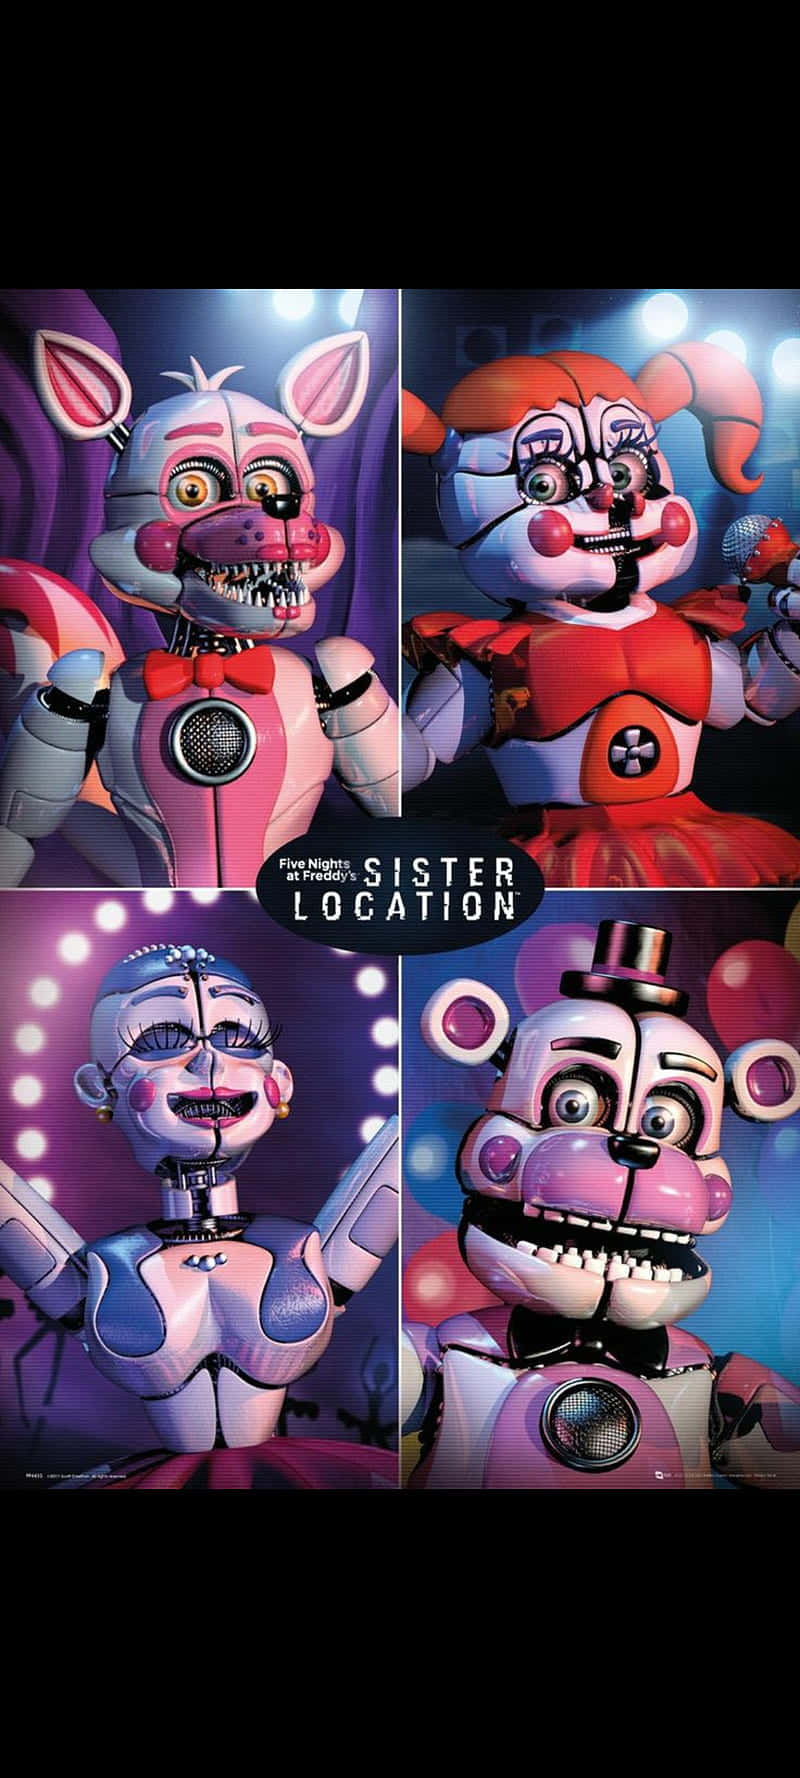 Einblick In Sister Location - Five Nights At Freddy's Wallpaper